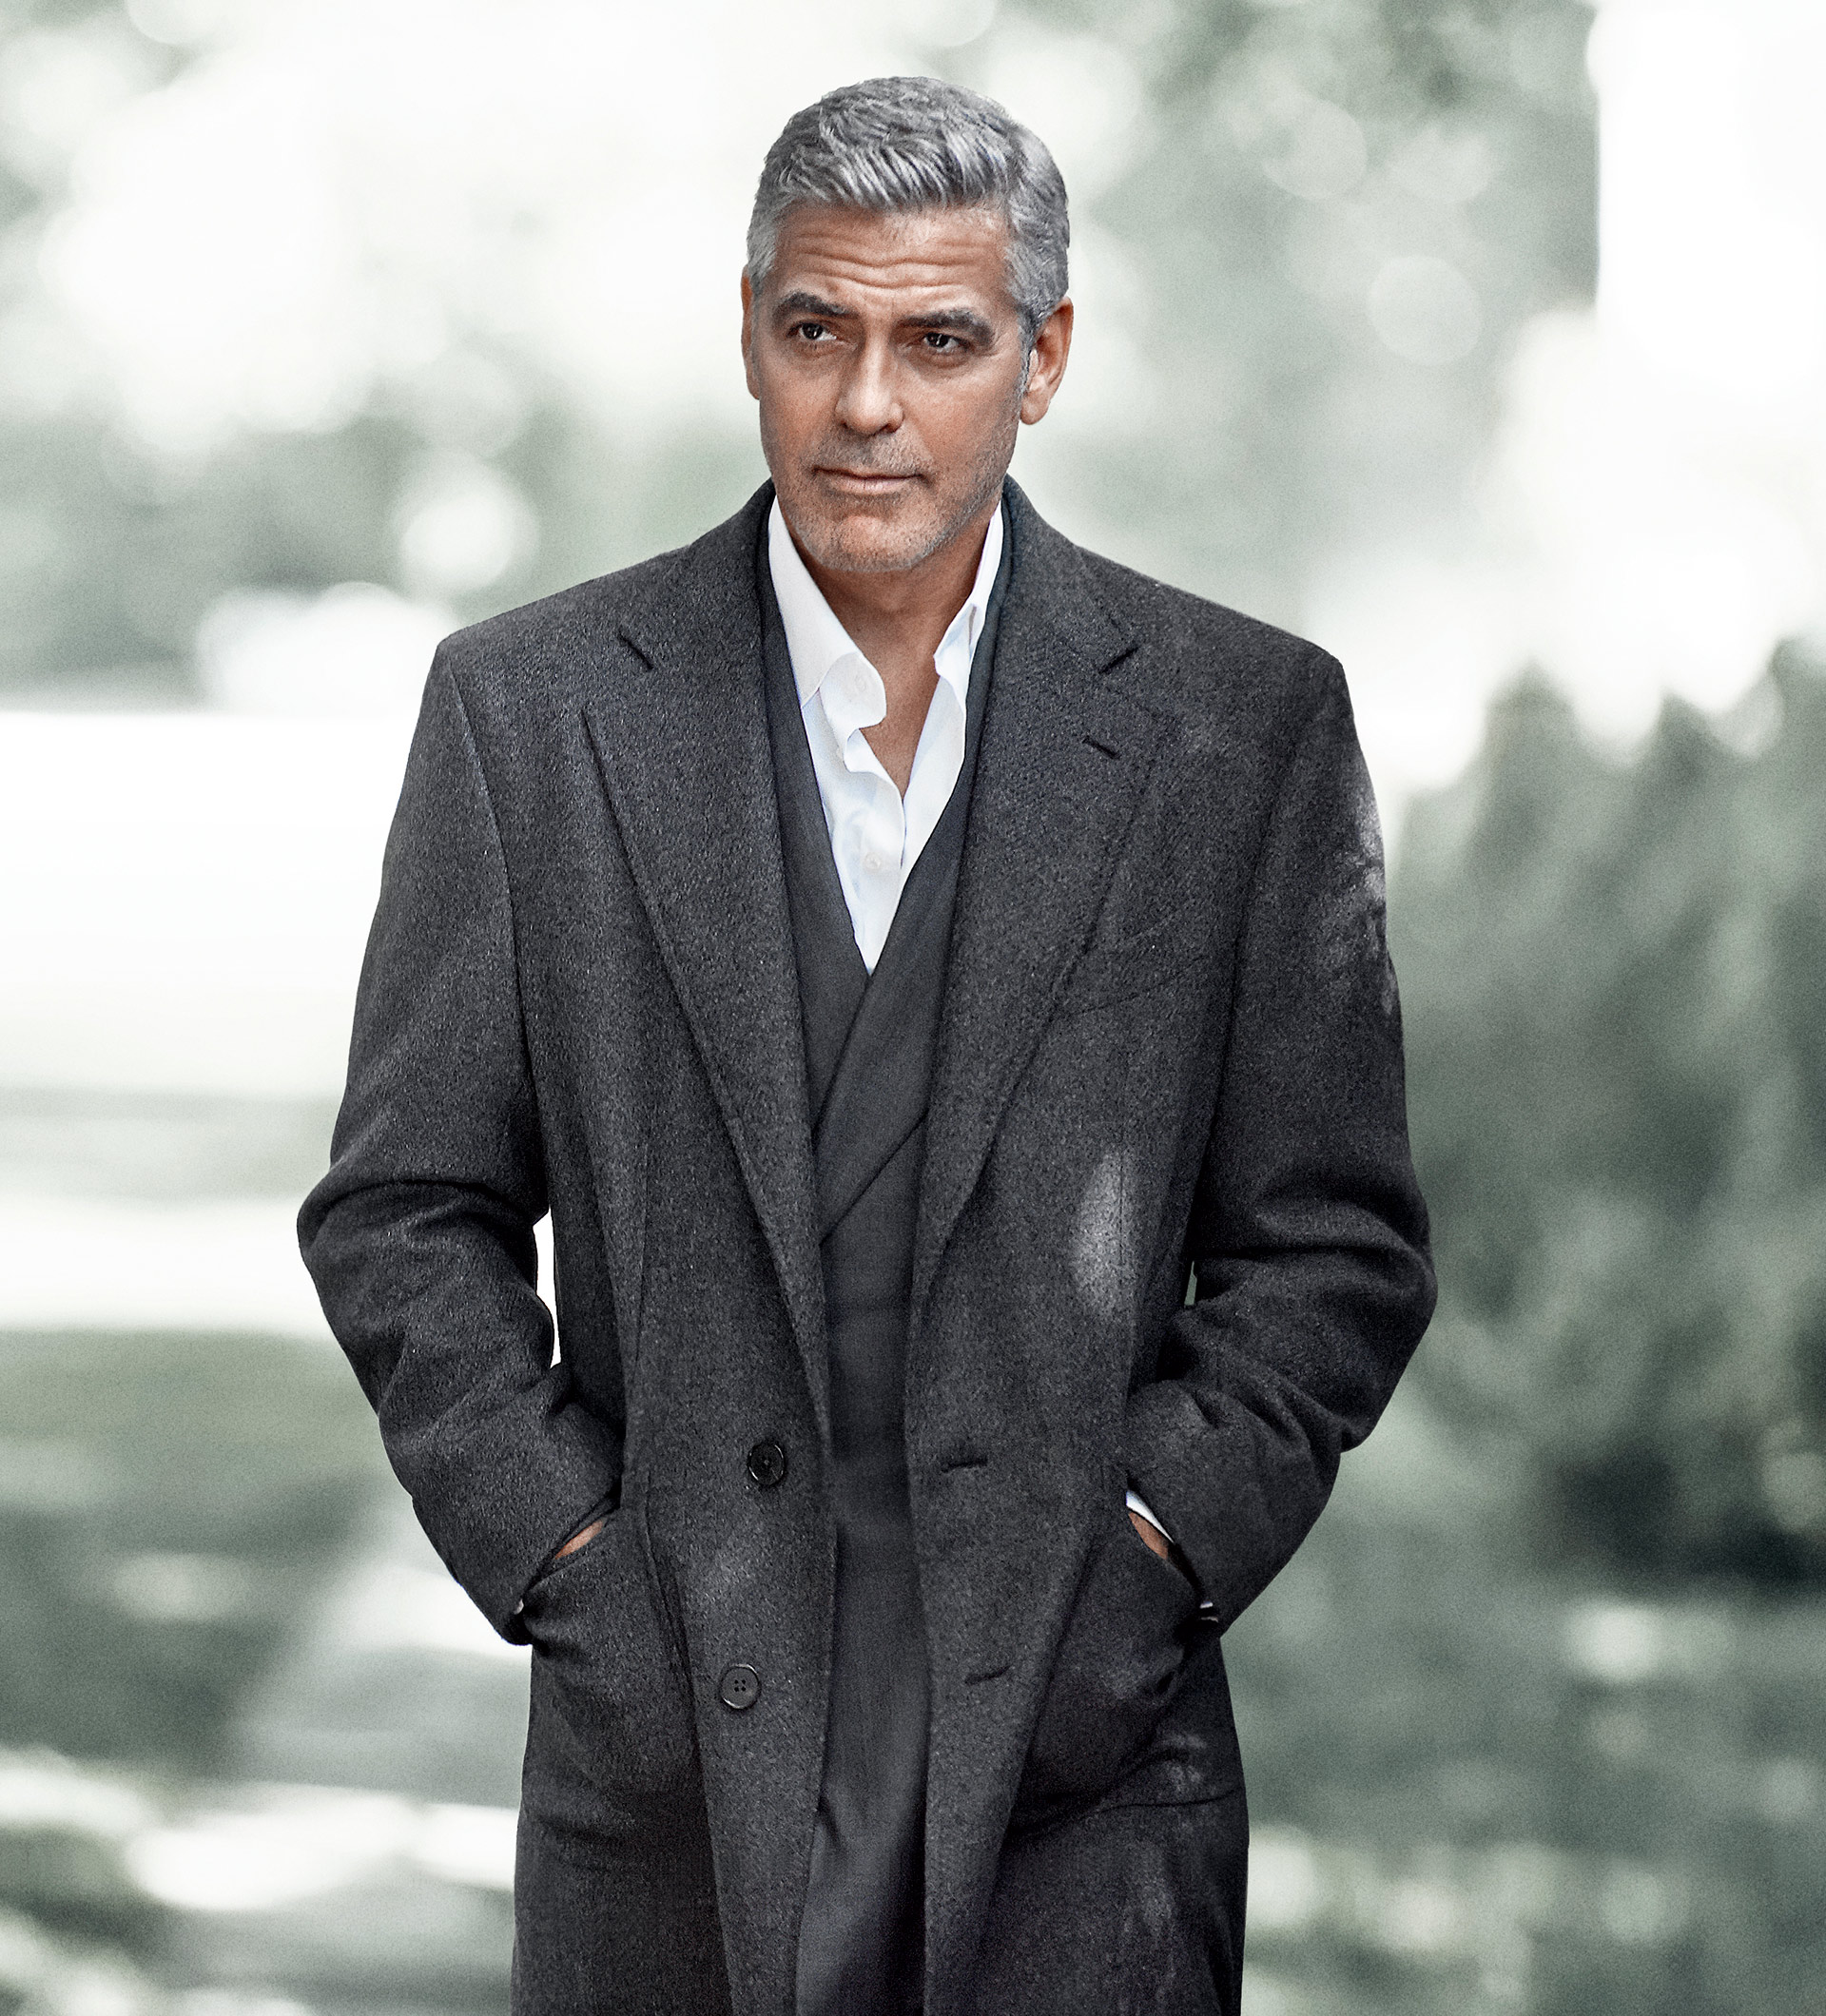 George Clooney Wallpaper High Quality